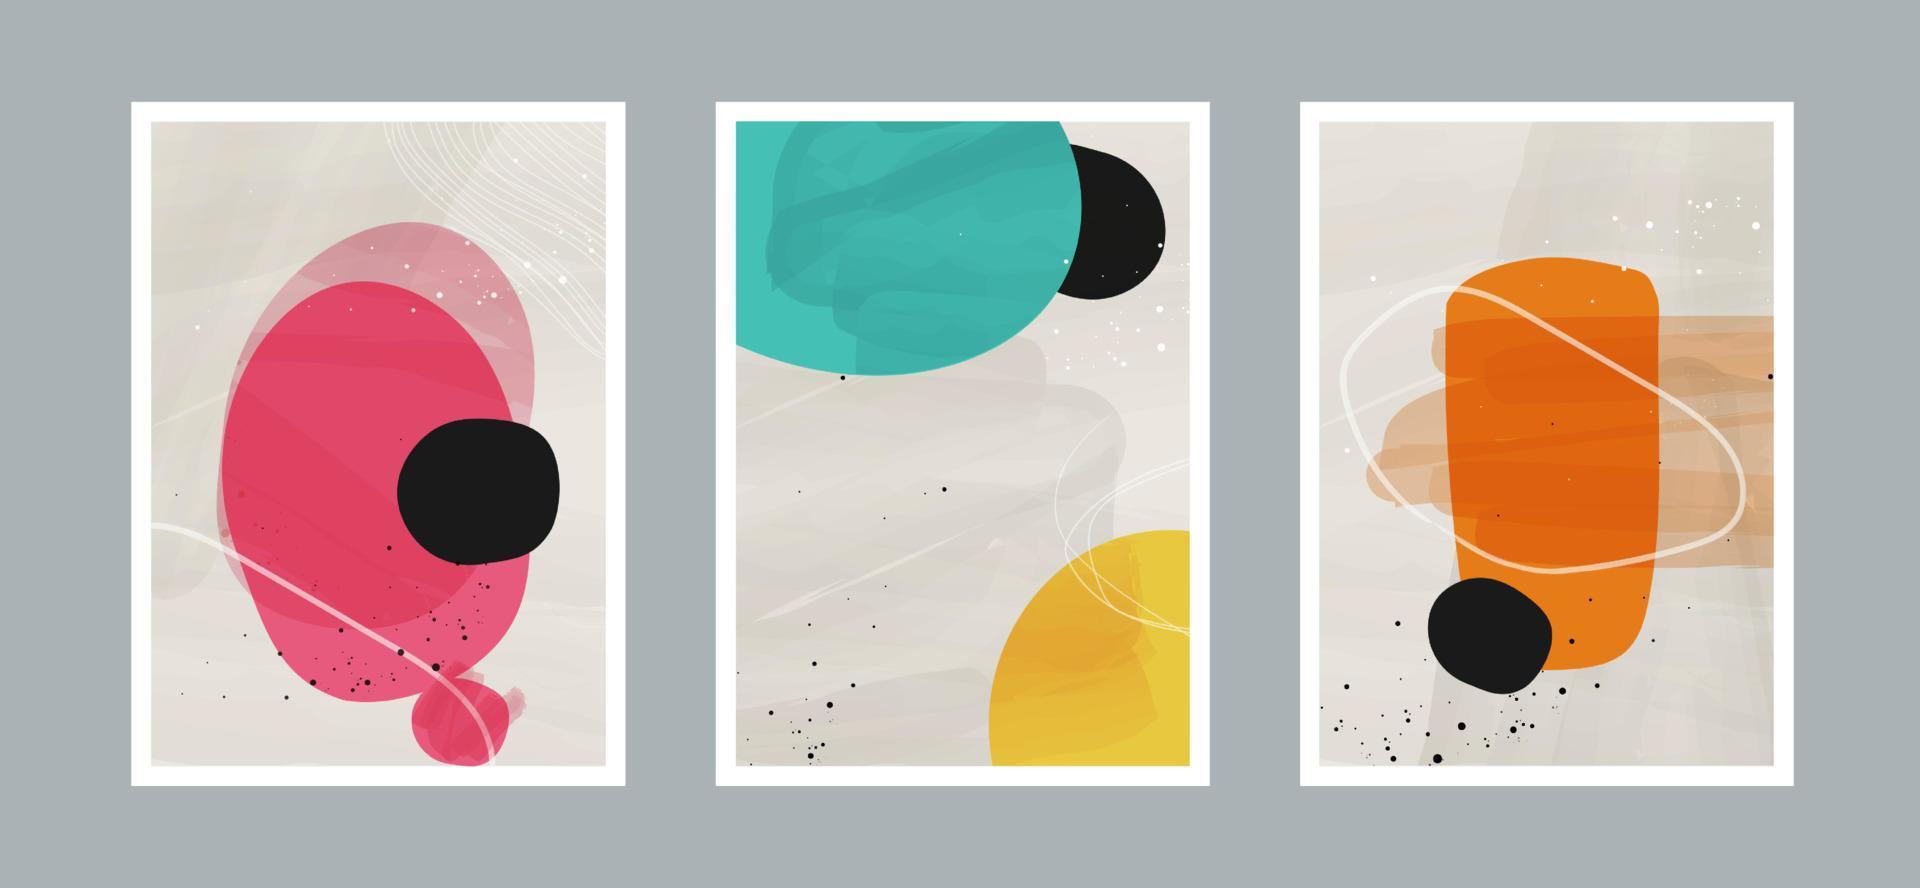 Abstract arts background with different shapes for wall decoration, postcard or brochure cover design. Vector illustrations design EPS10.